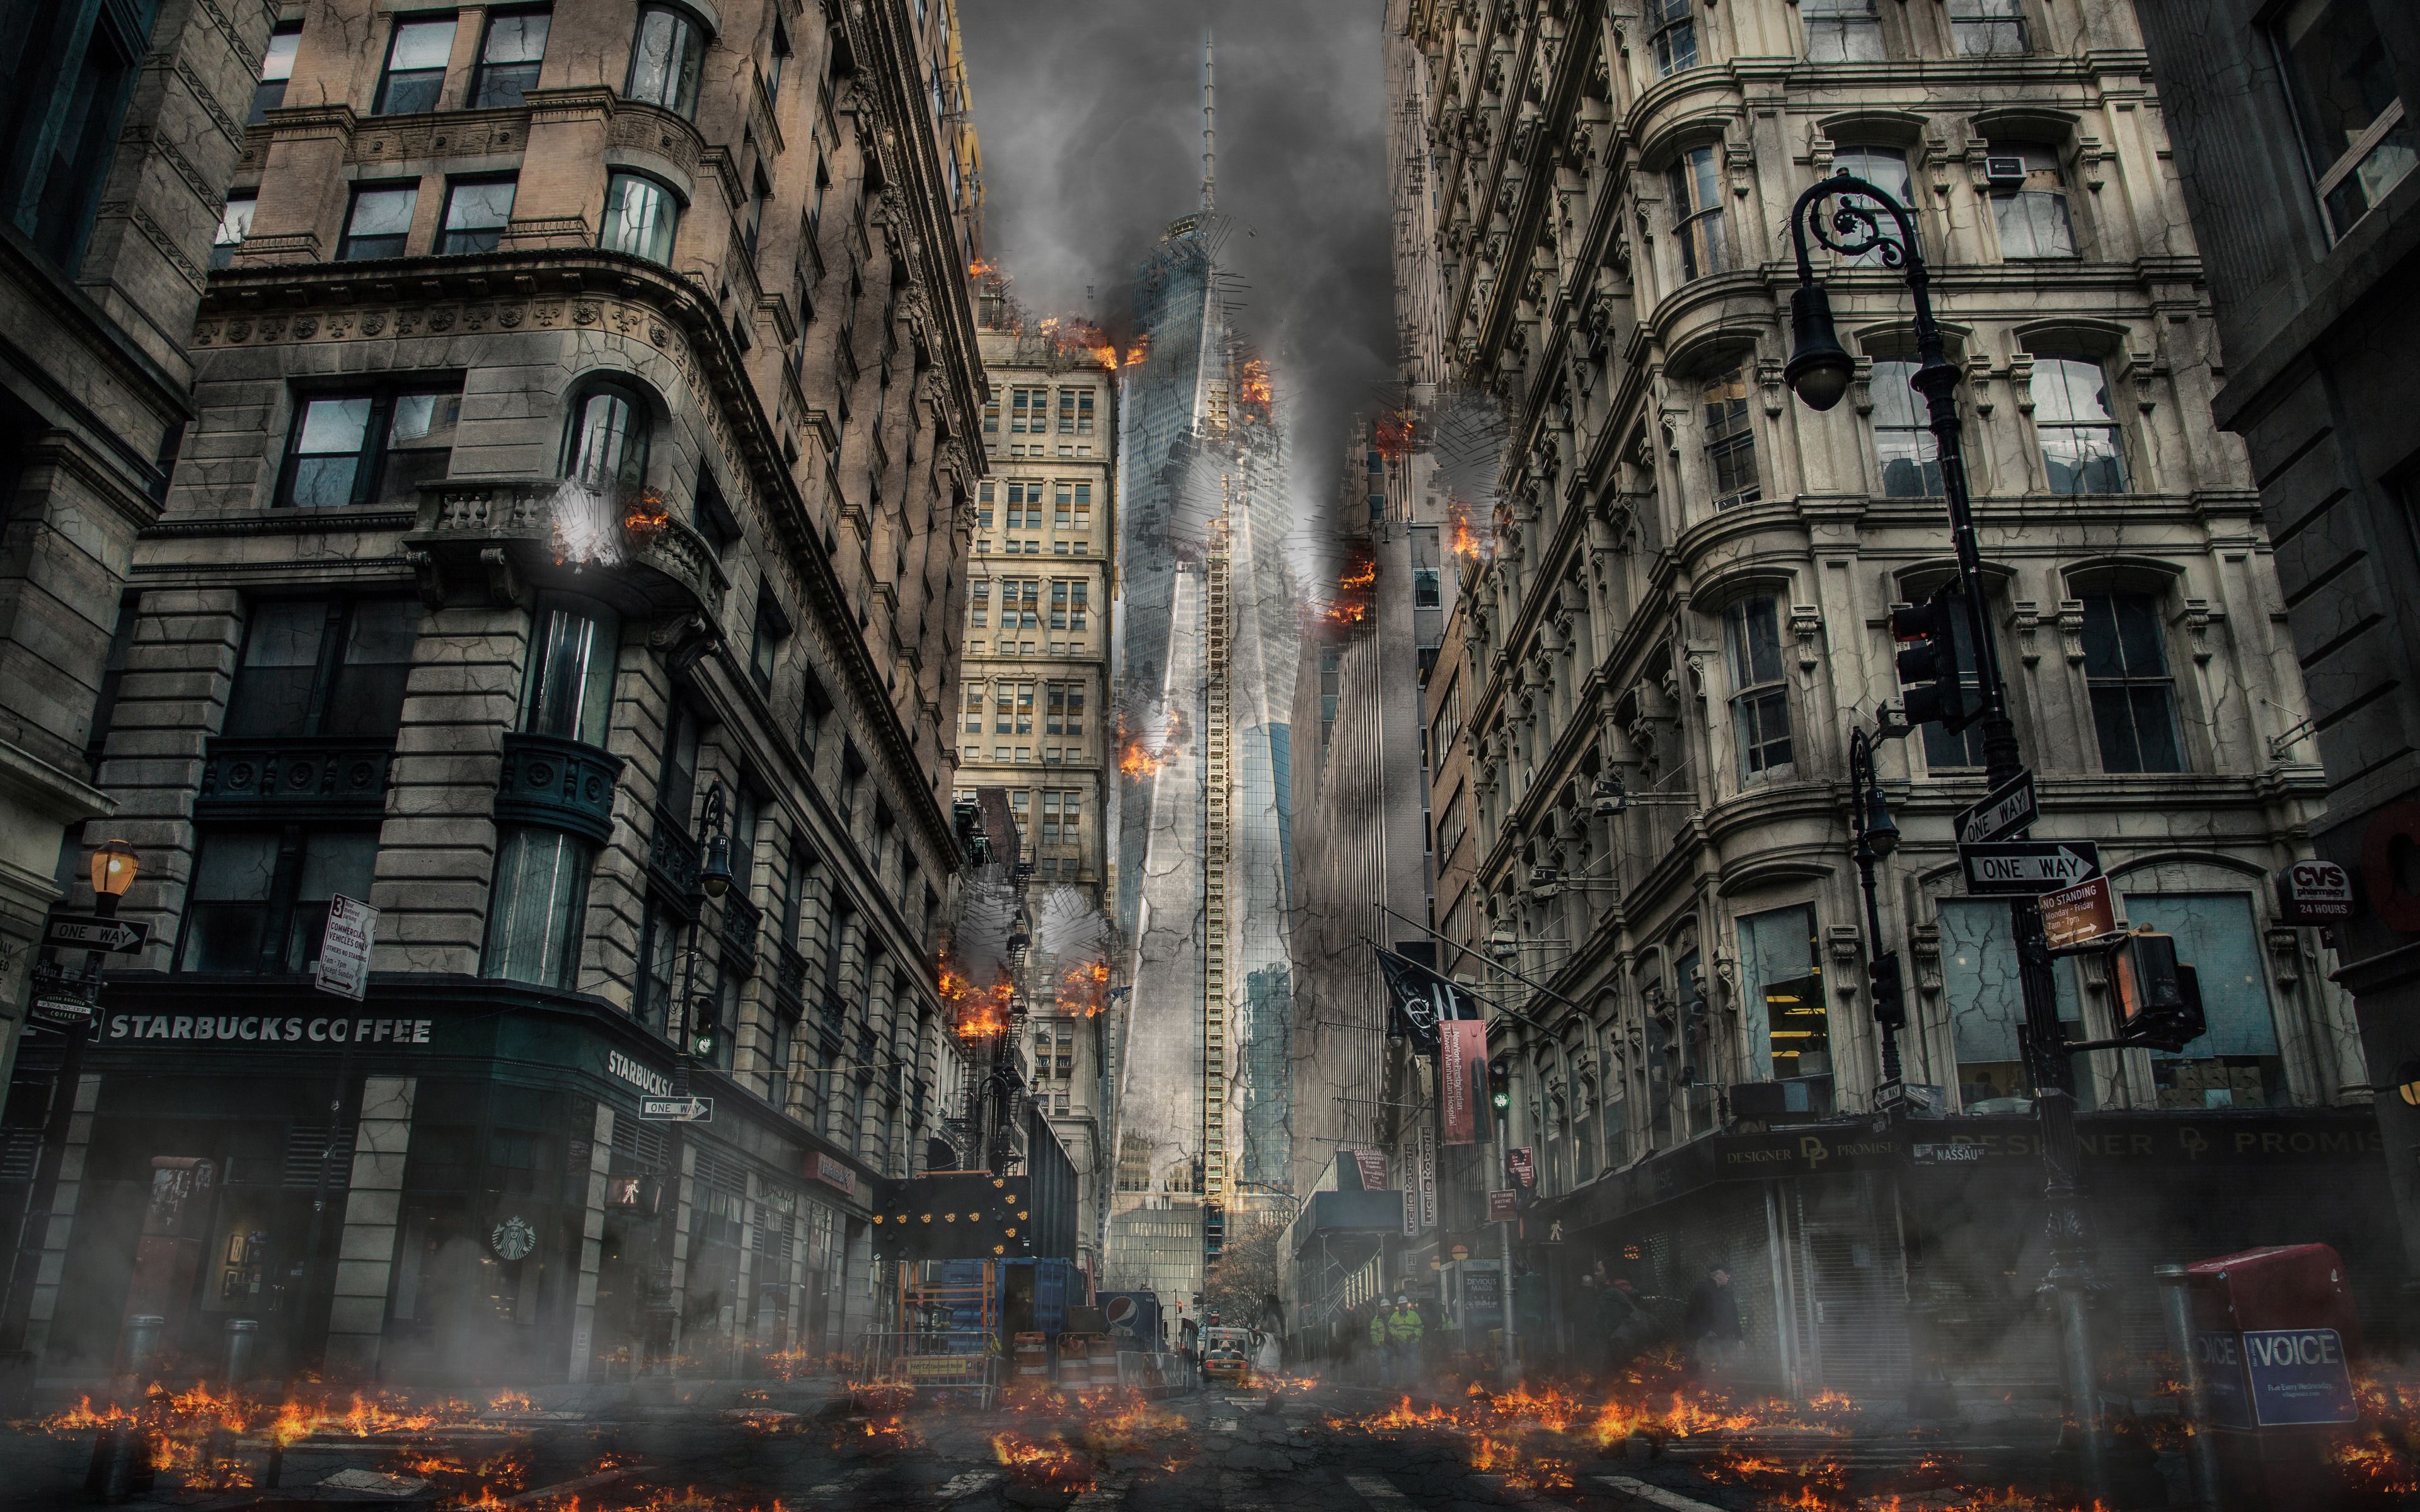 Download wallpaper apocalypse, 4k, buildings, destruction, skyscrapers, America for desktop with resolution 3840x2400. High Quality HD picture wallpaper